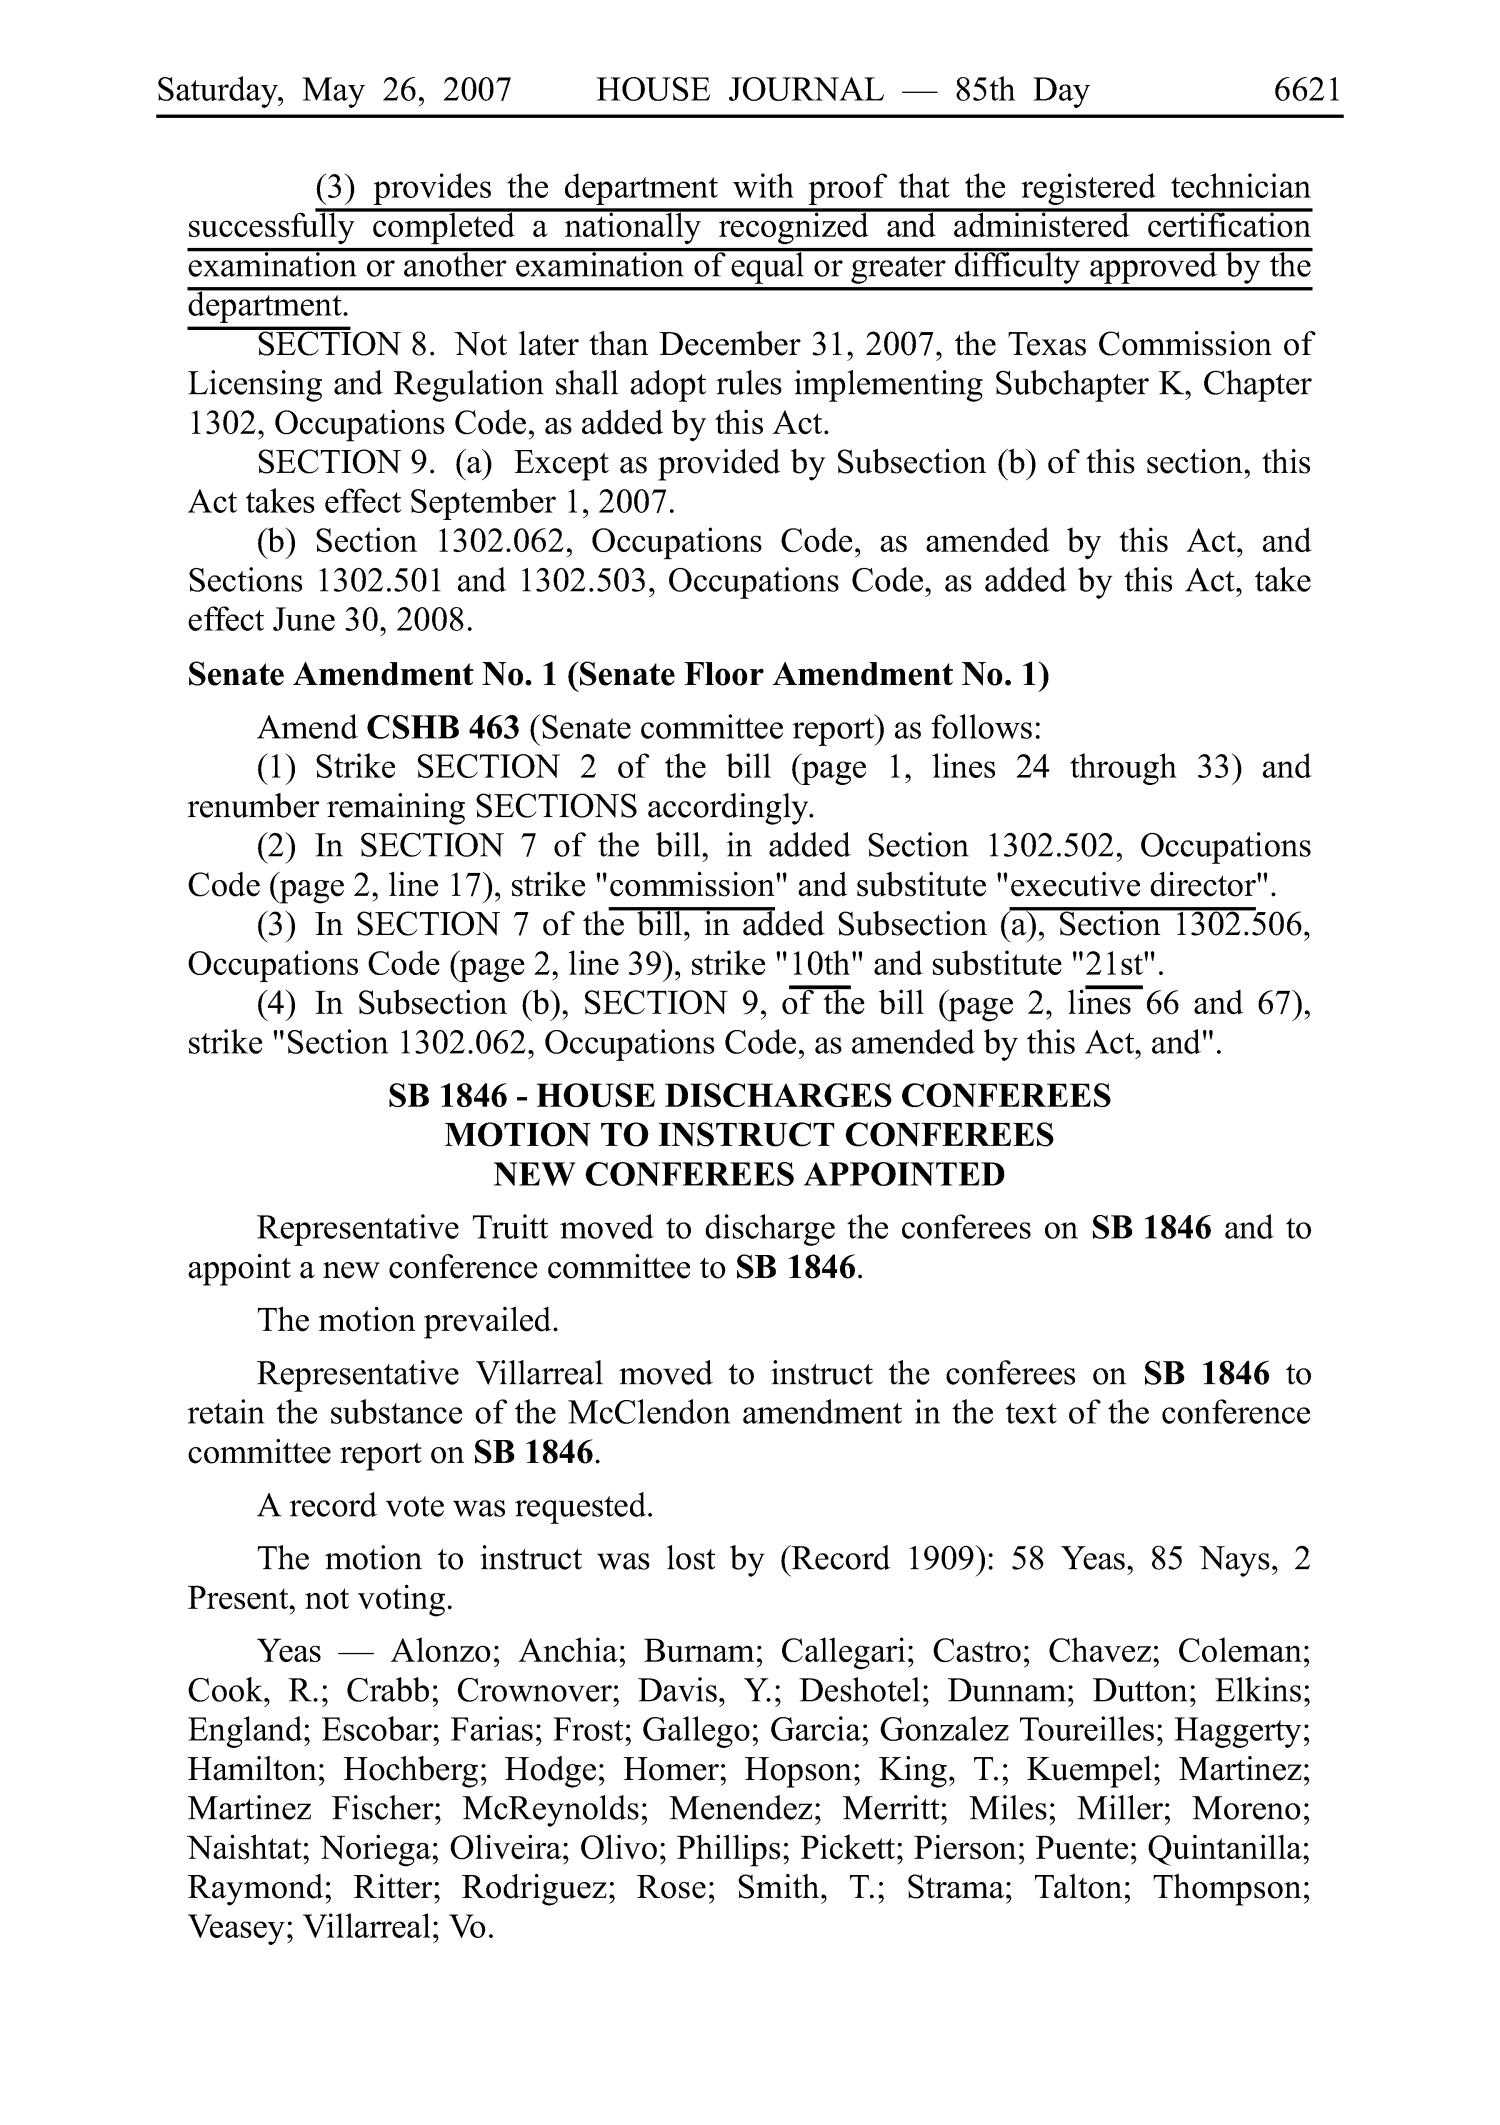 Journal of the House of Representatives of the Regular Session of the Eightieth Legislature of the State of Texas, Volume 6
                                                
                                                    6621
                                                